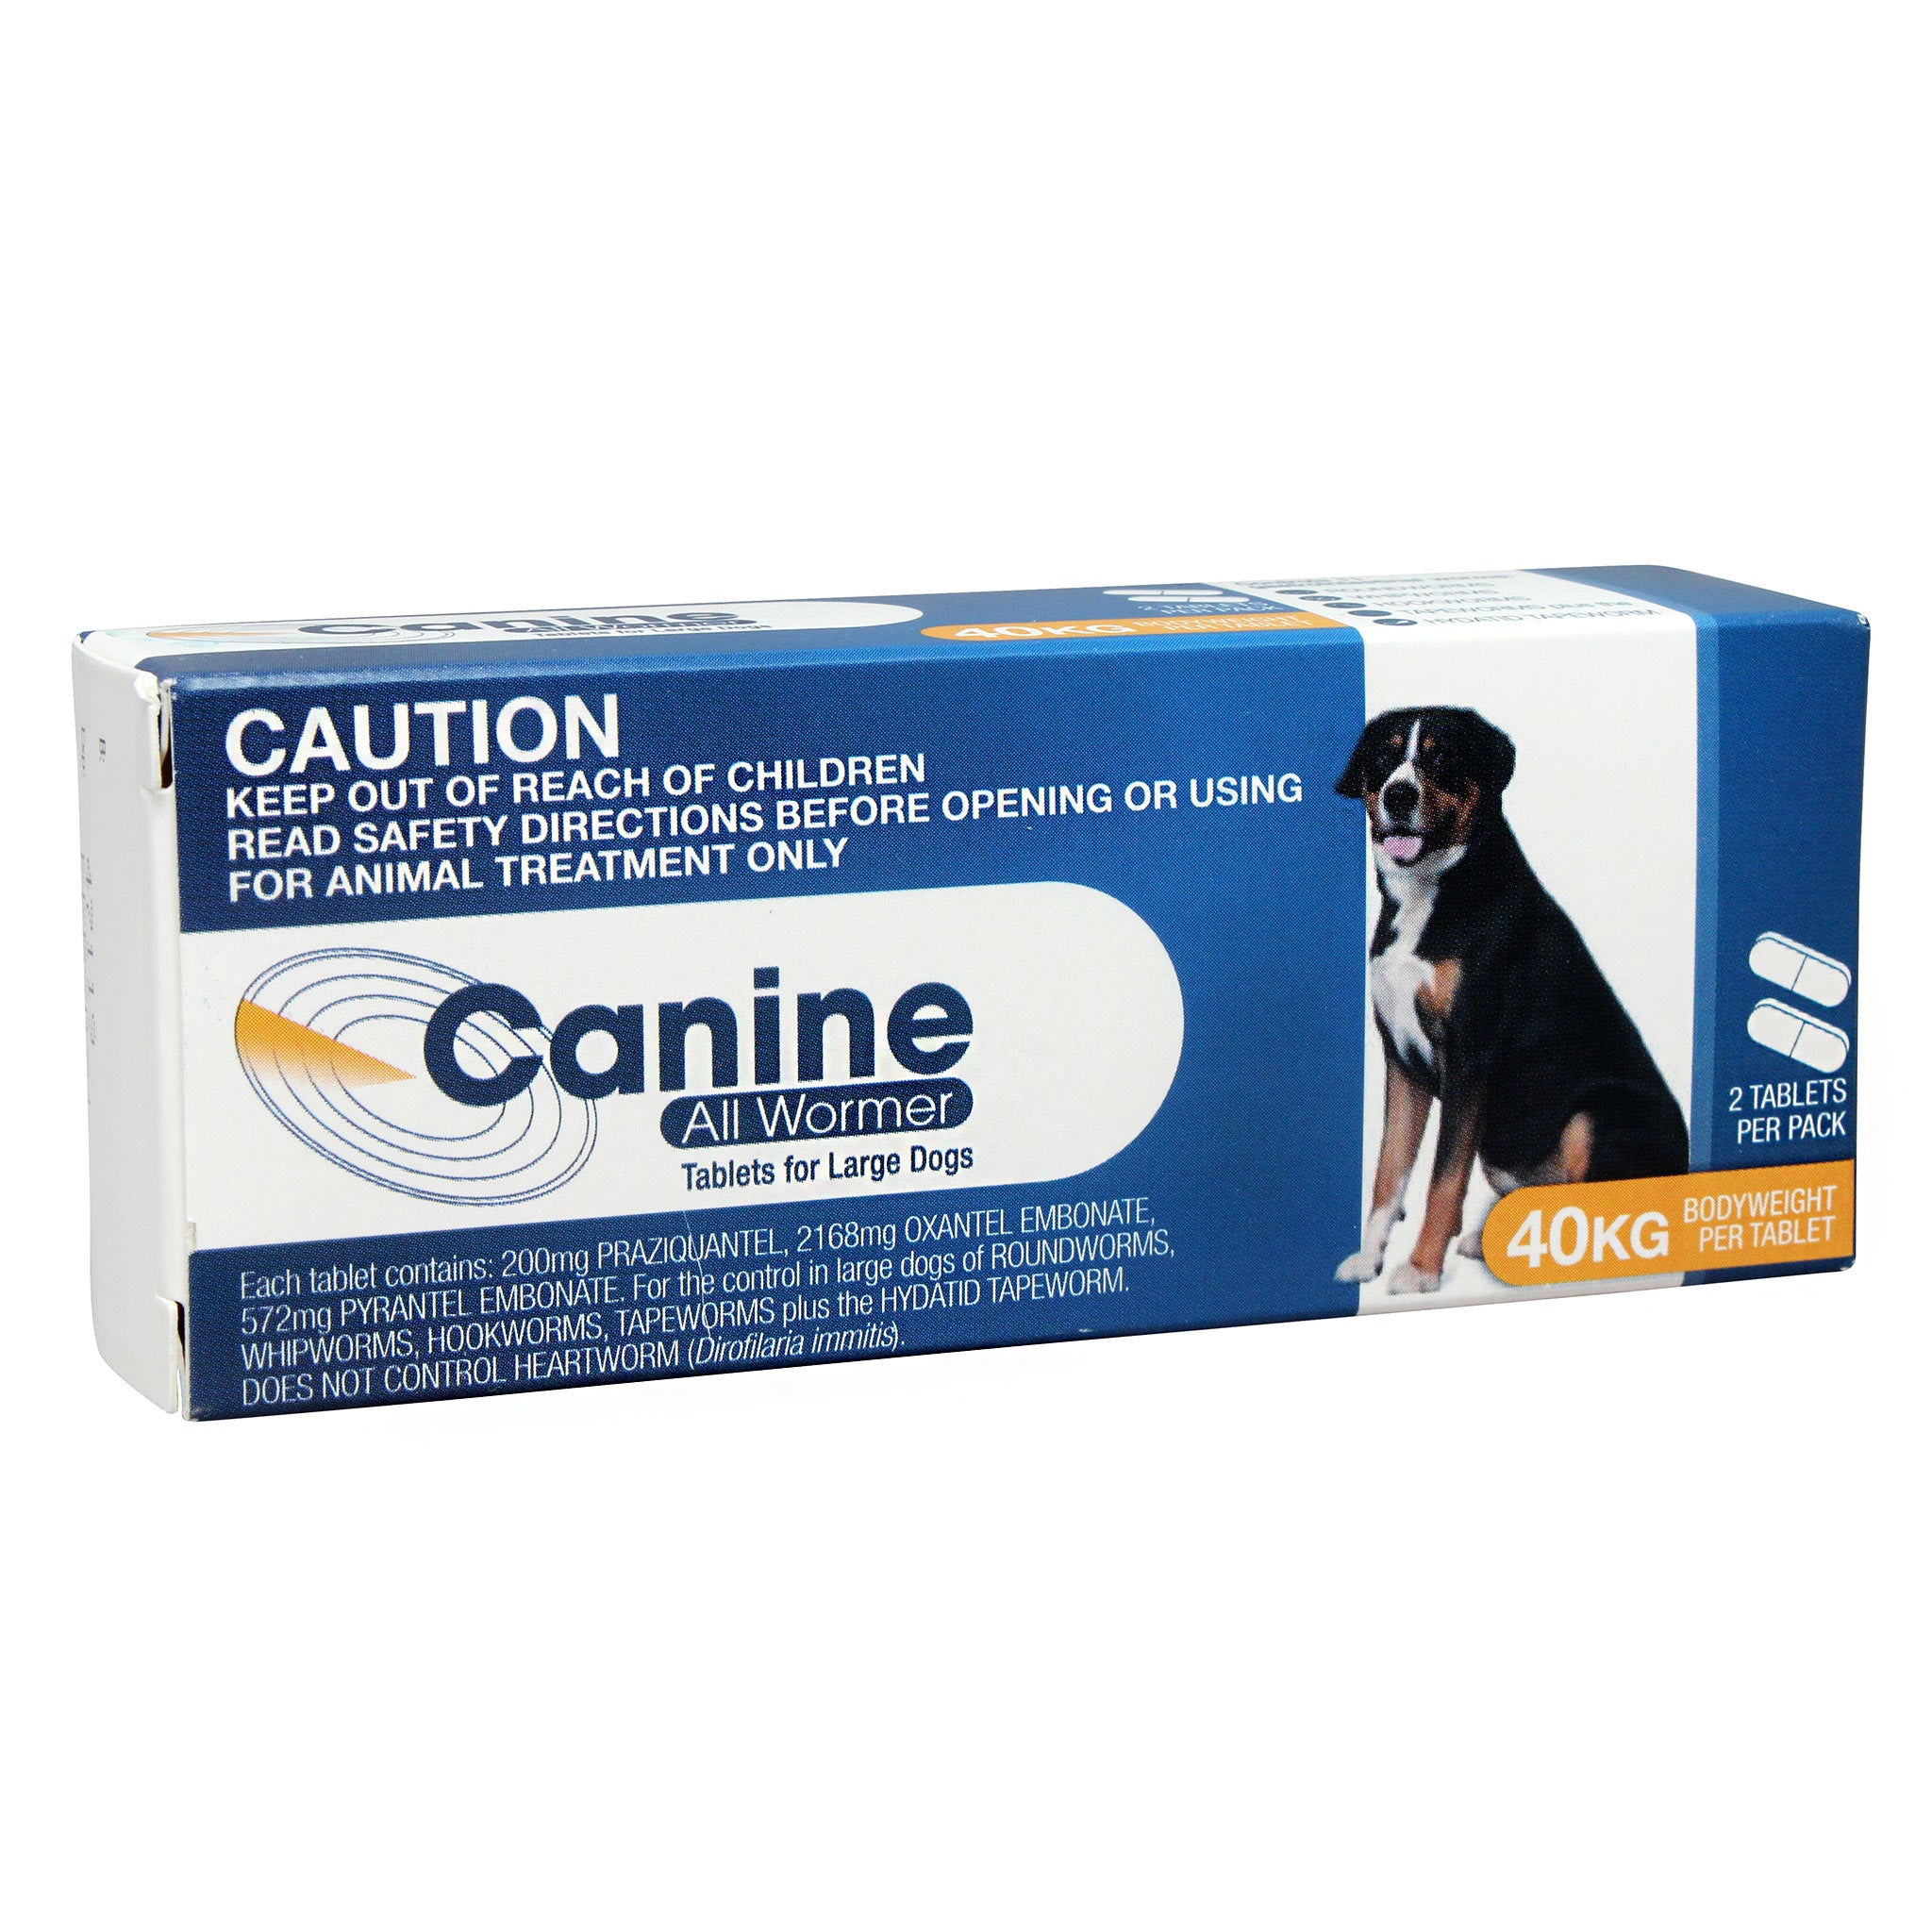 dog worming tablets uk